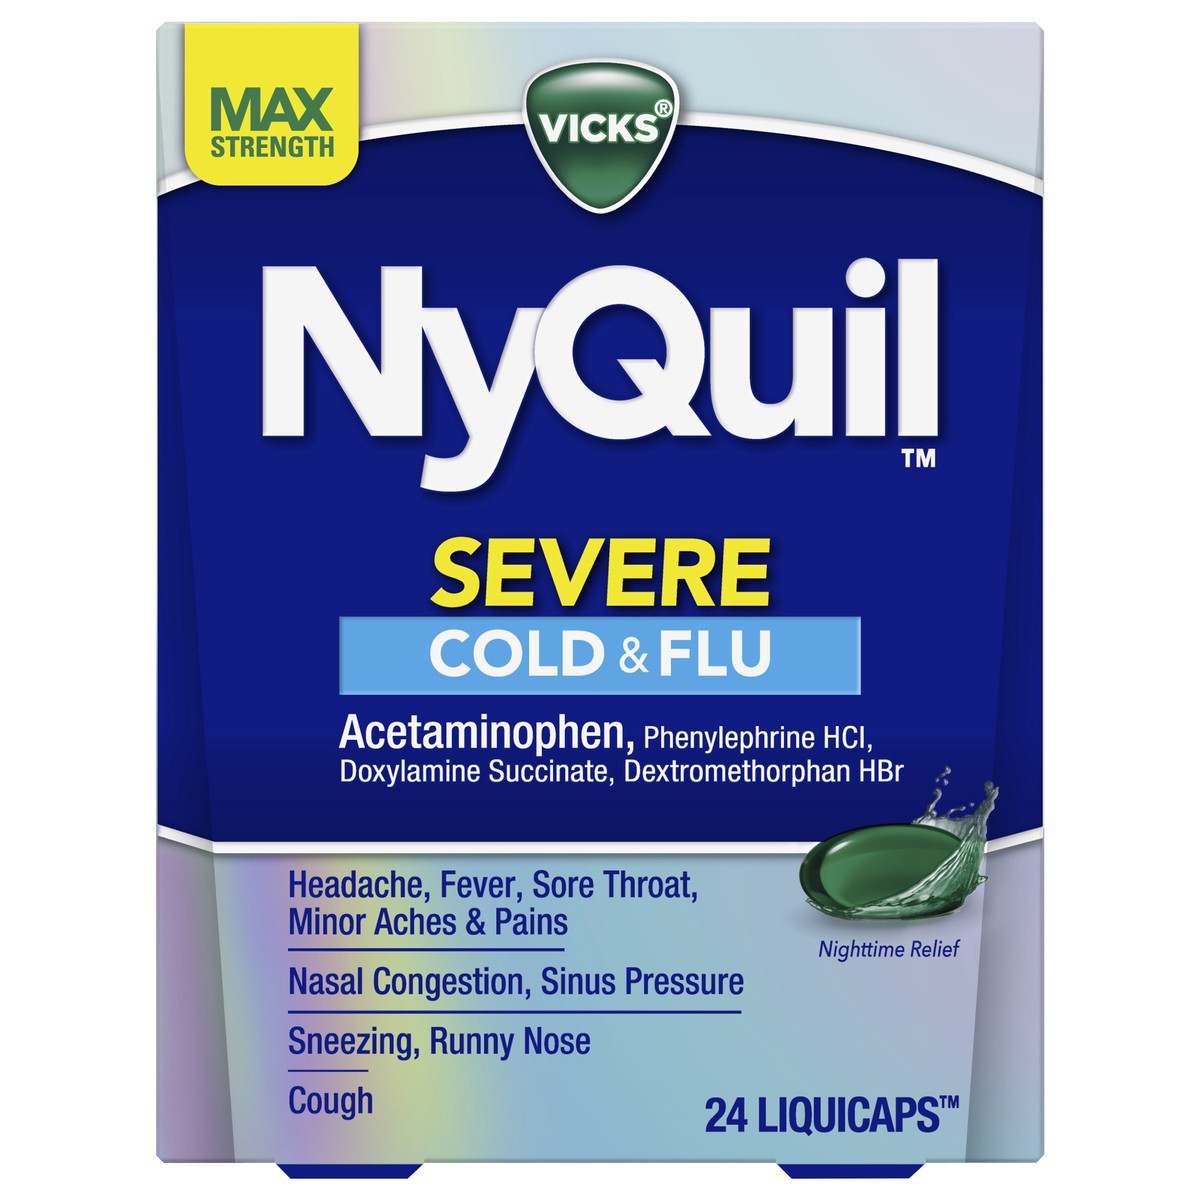 slide 1 of 1, Vicks NyQuil SEVERE Cold & Flu Medicine, Maximum Strength 9-Symptom Nighttime Relief for Headache, Fever, Sore Throat, Minor Aches and Pains, Nasal Congestion, Sinus Pressure, Sneezing, Runny Nose and Cough, 24 Liquicaps, 24 ct